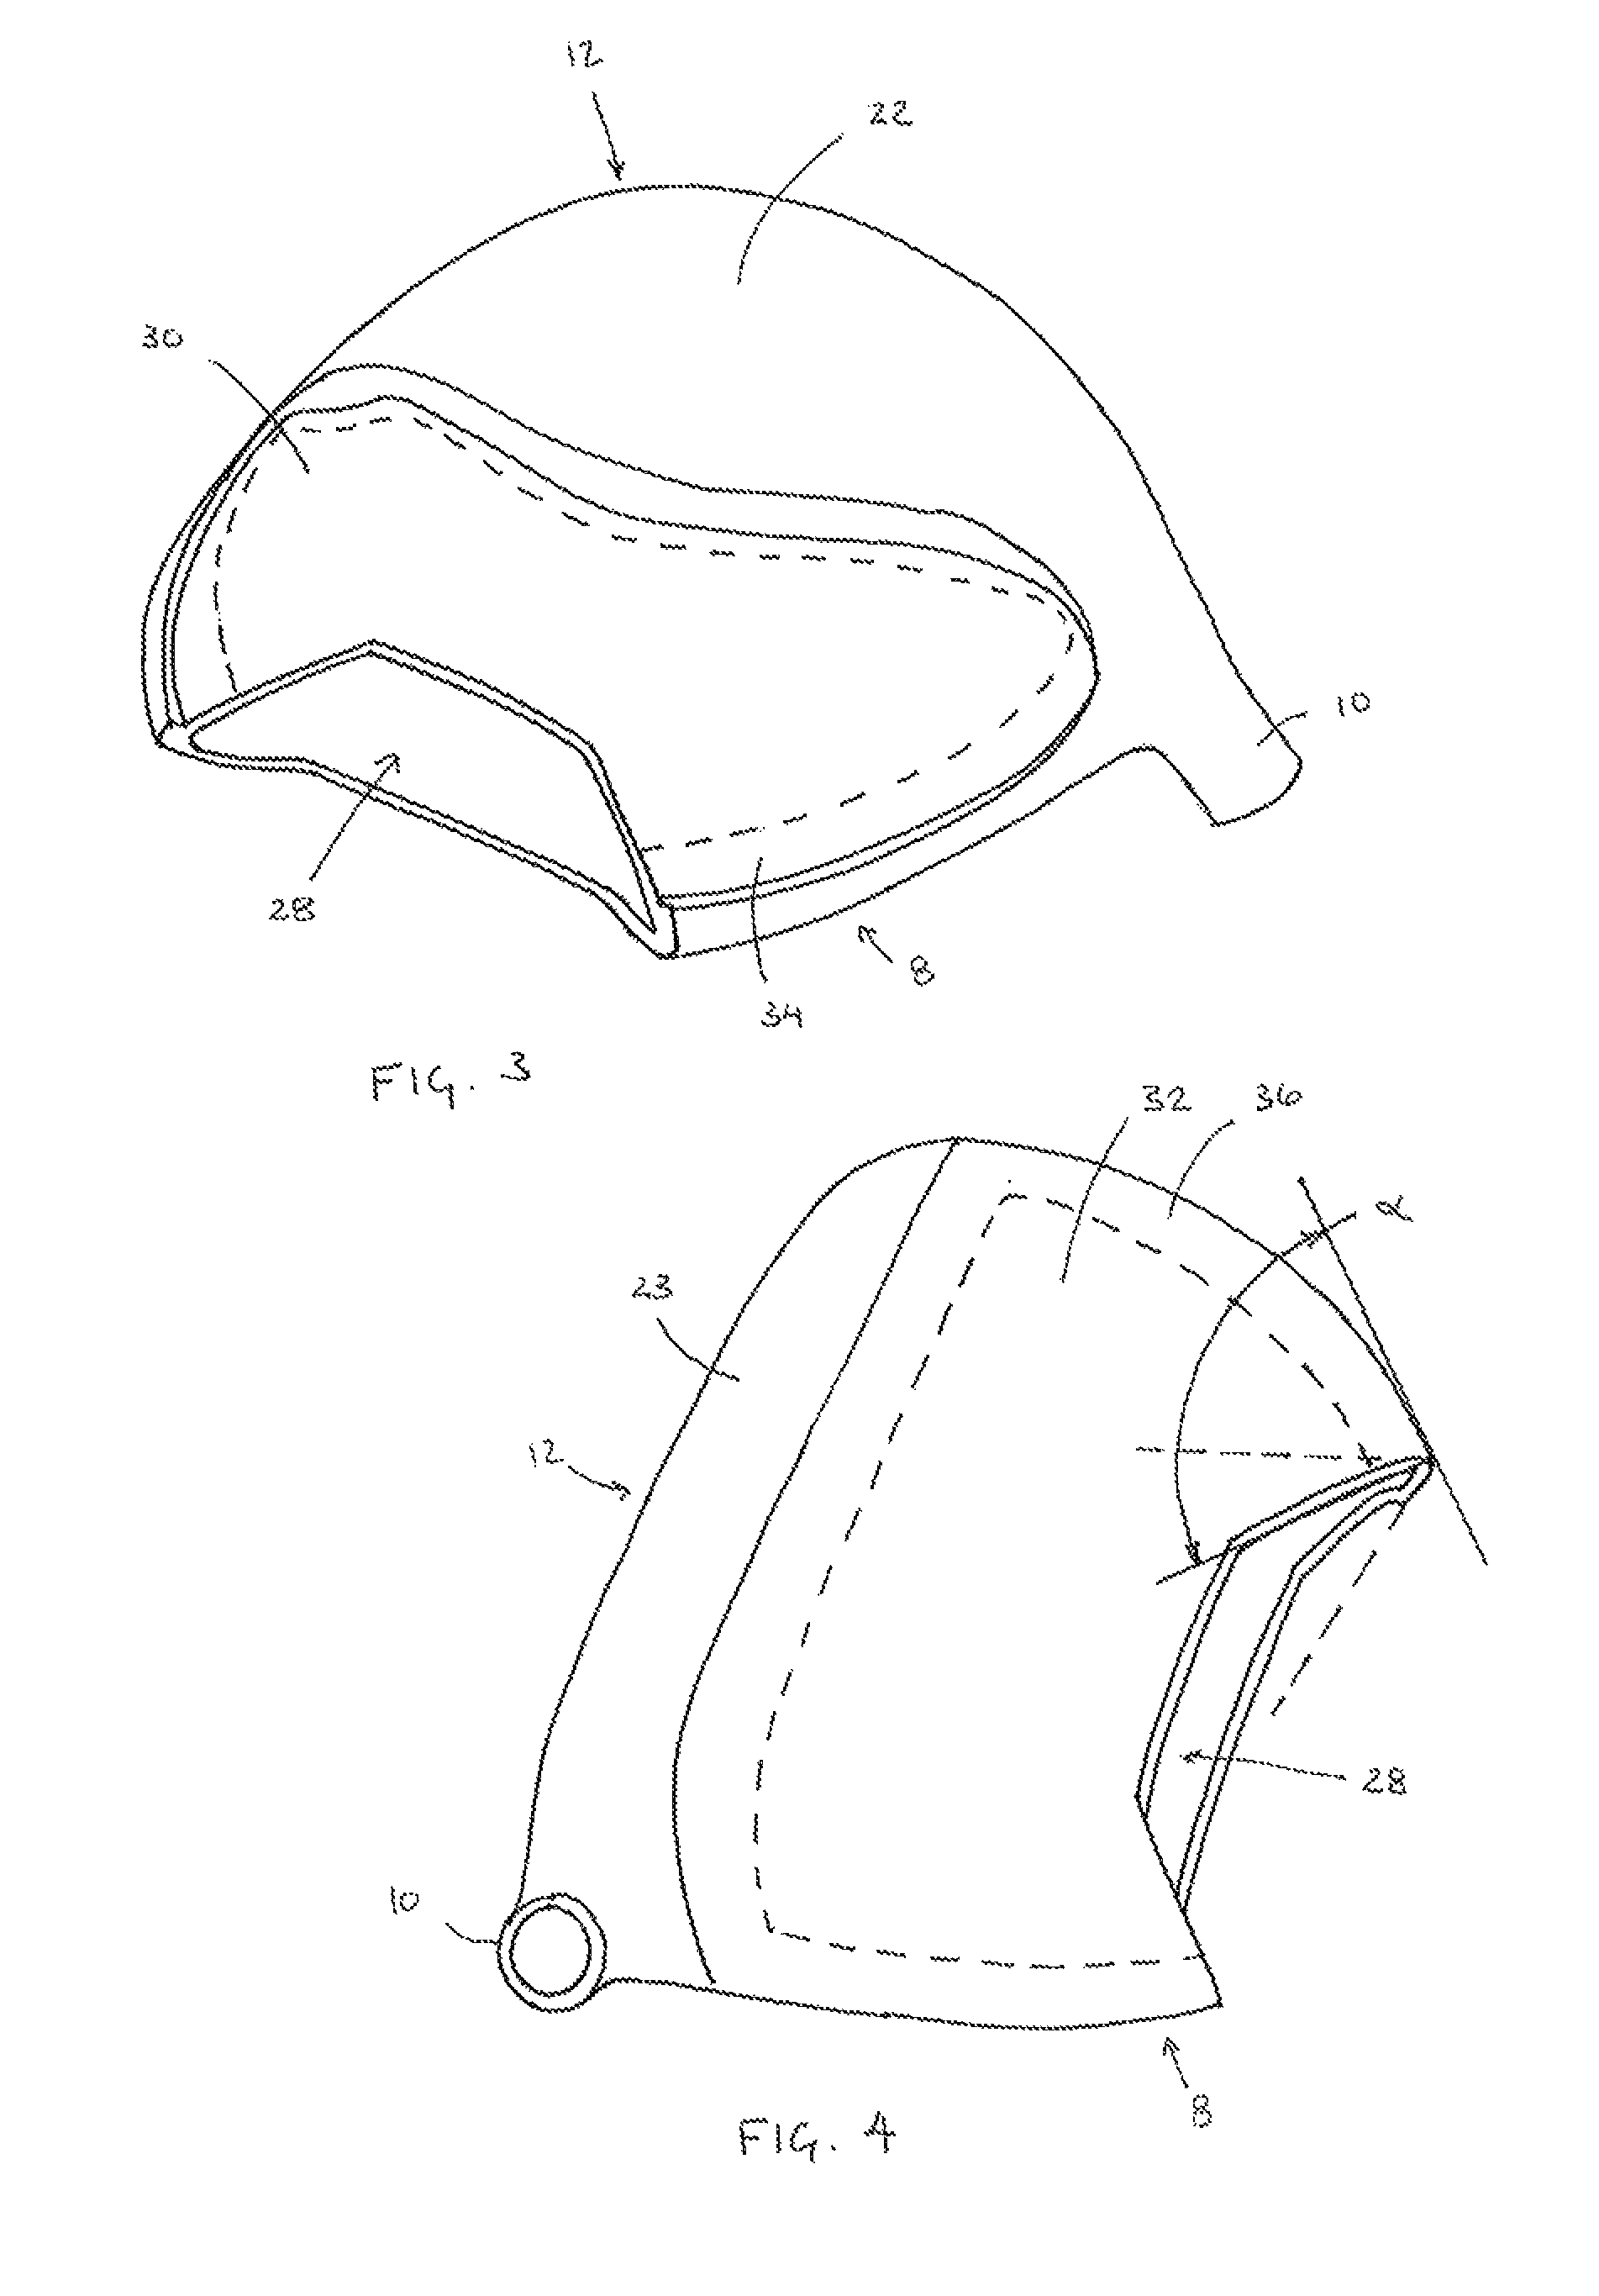 Golf club head with multi-component construction